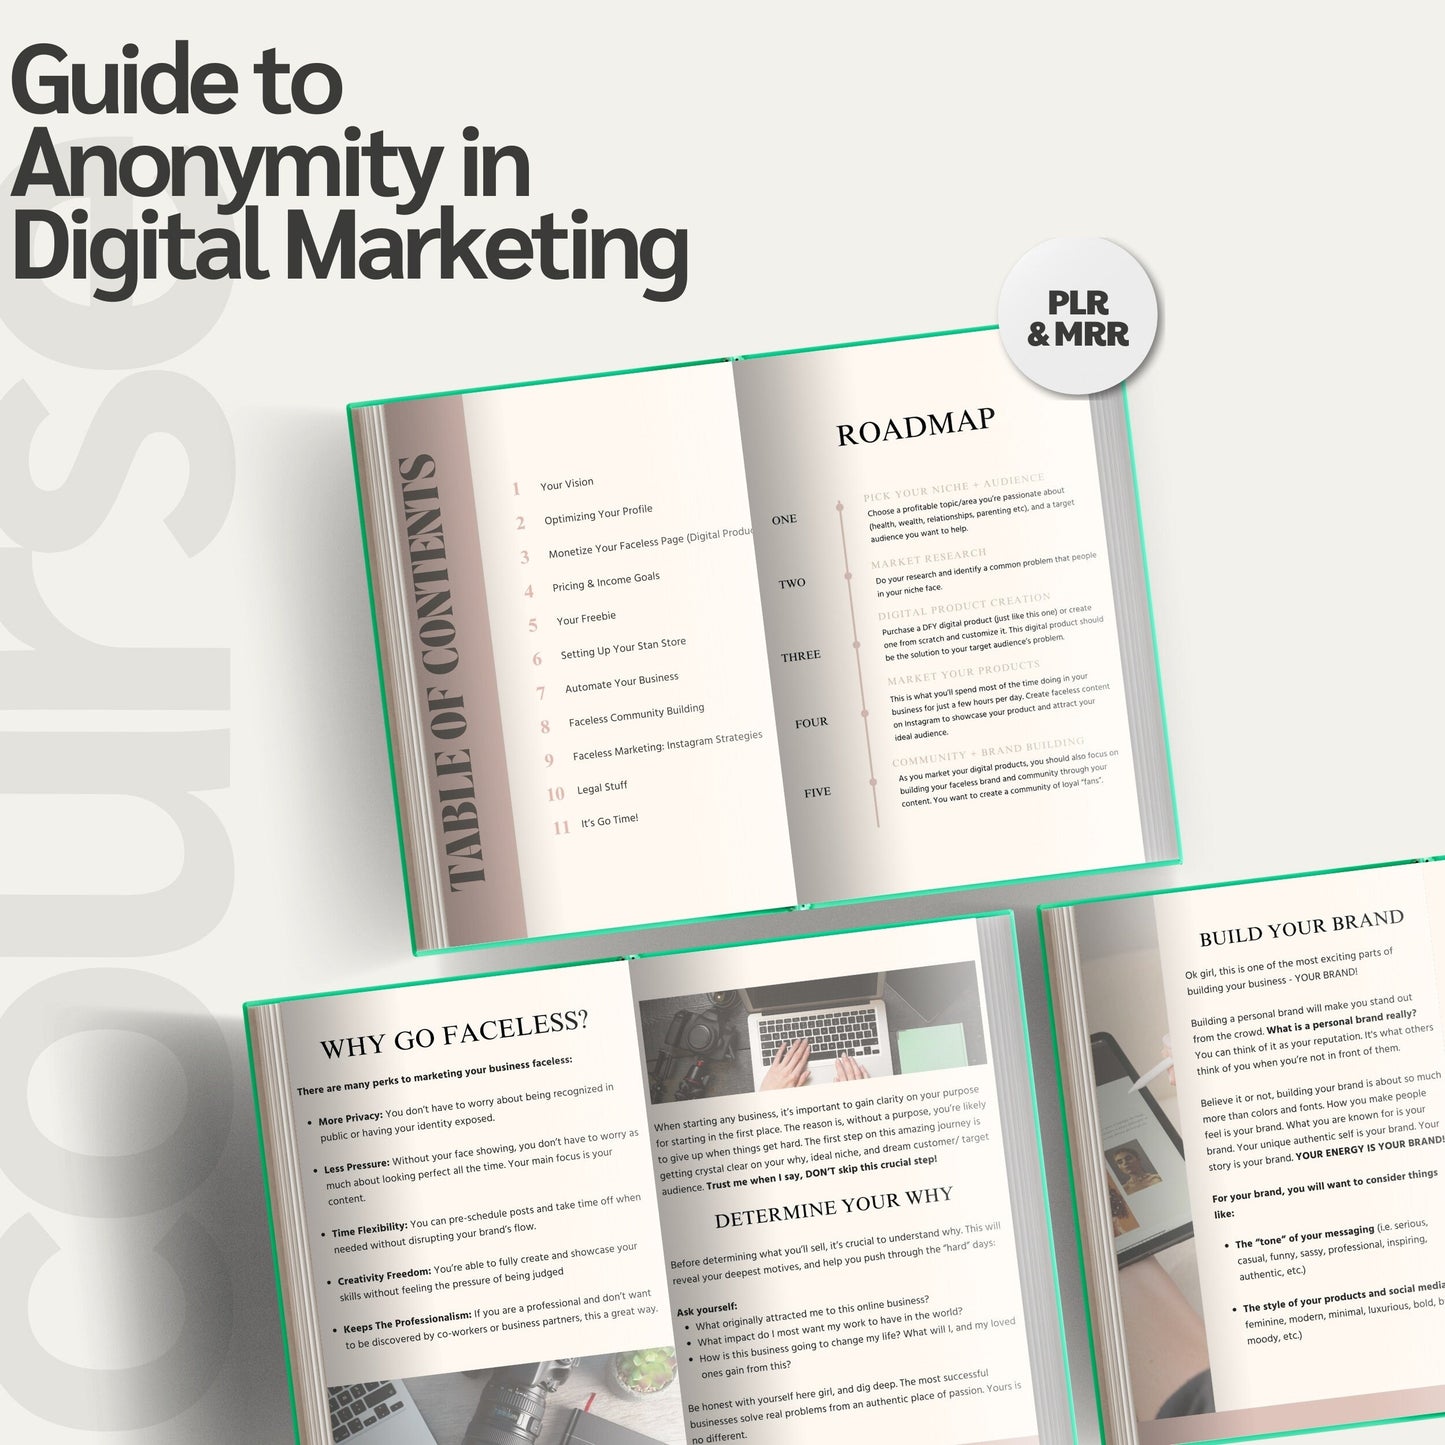 Faceless Marketing PLR Guide with Resell Rights- DFY Digital Product